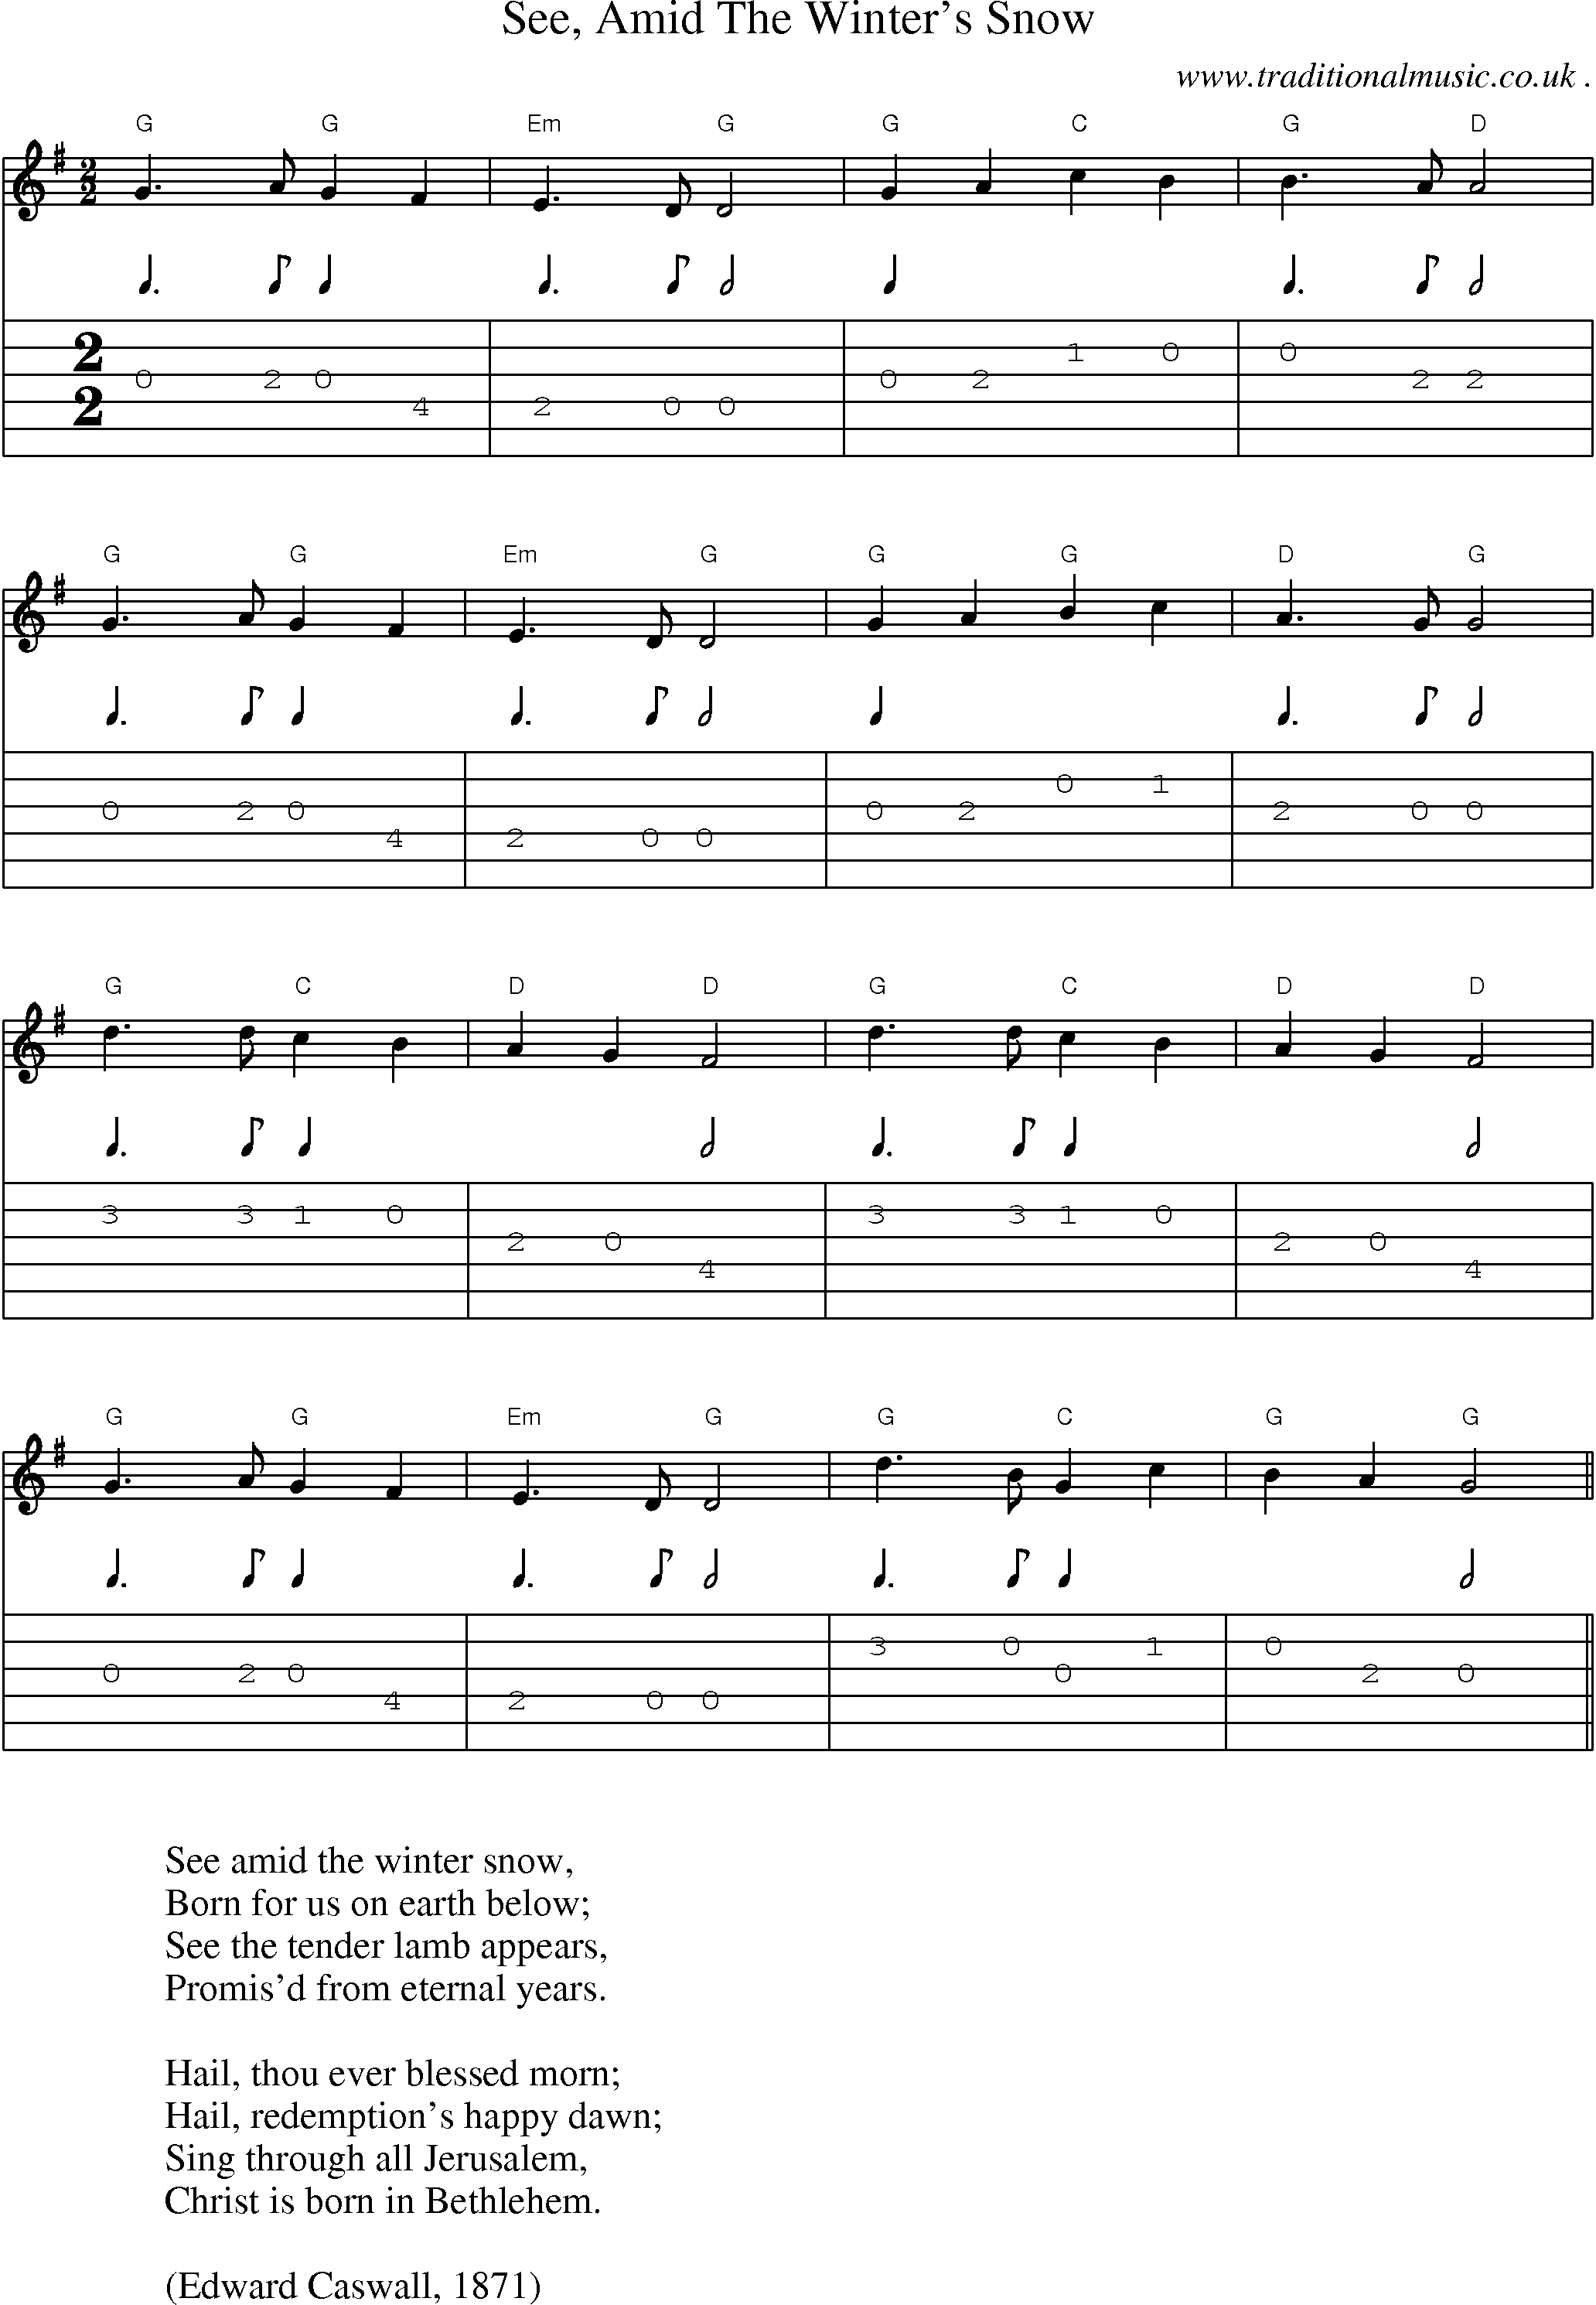 Music Score and Guitar Tabs for See Amid The Winters Snow